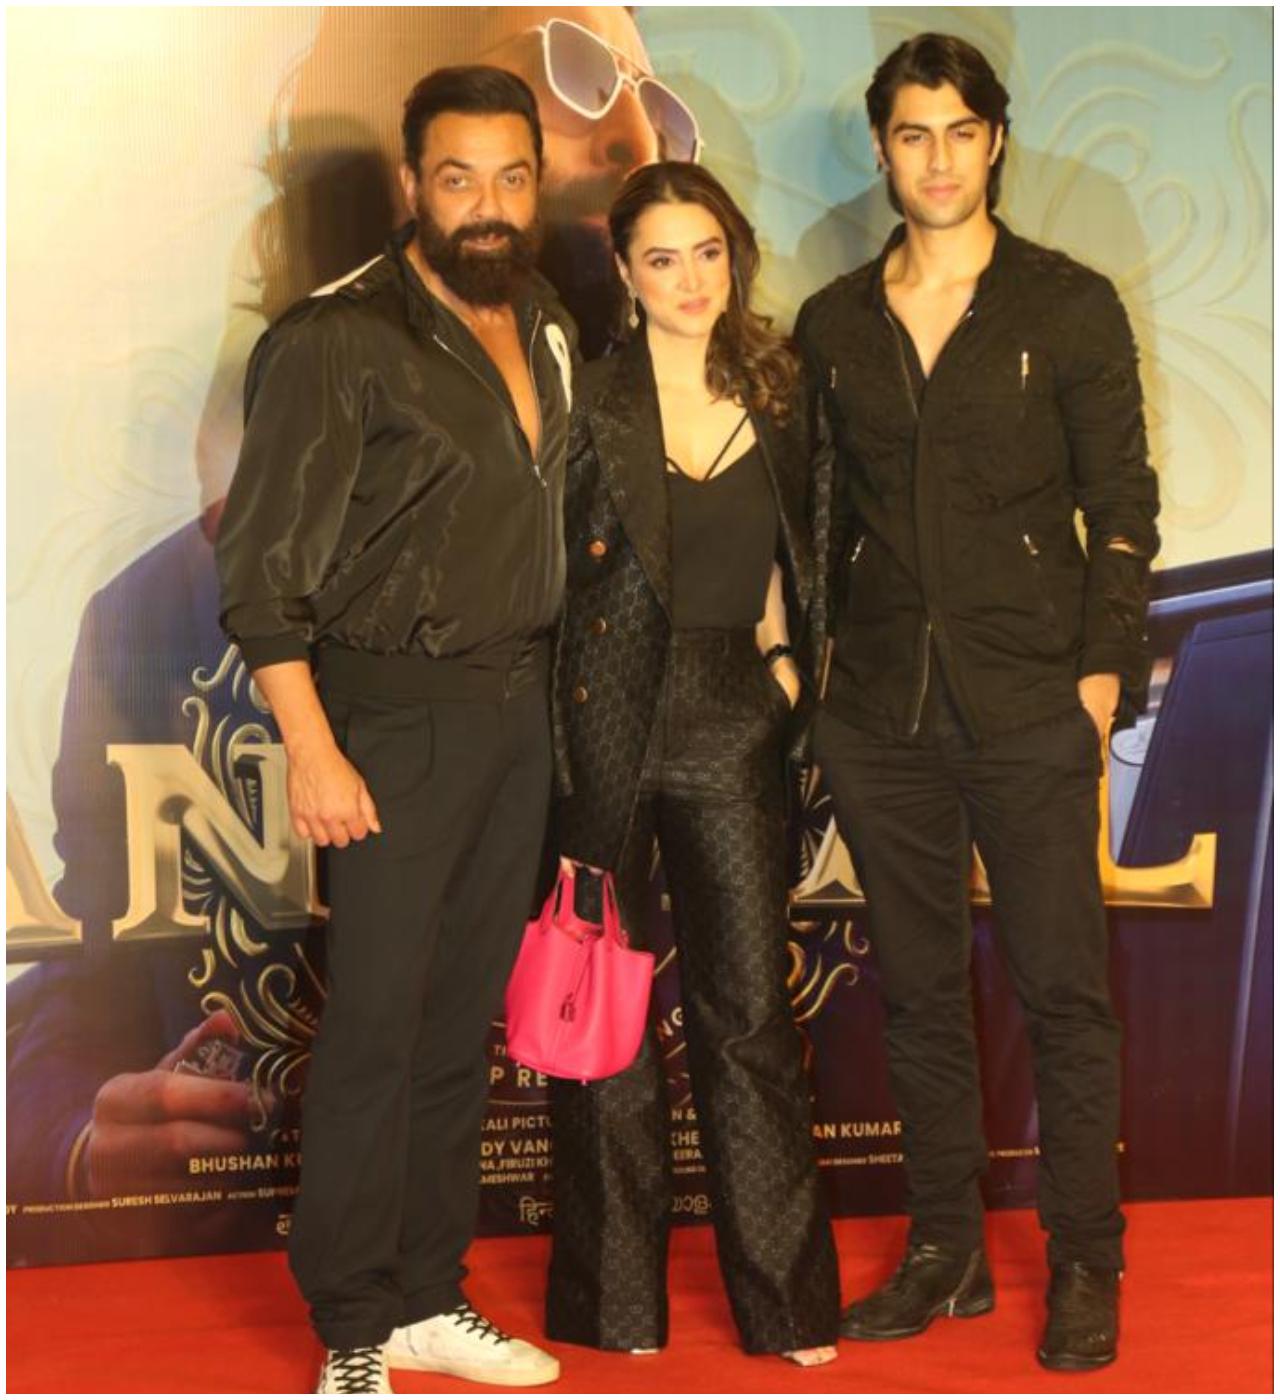 Bobby Deol with his son and wife Tanya at the movie screening. (Photo: Pallav Paliwal)